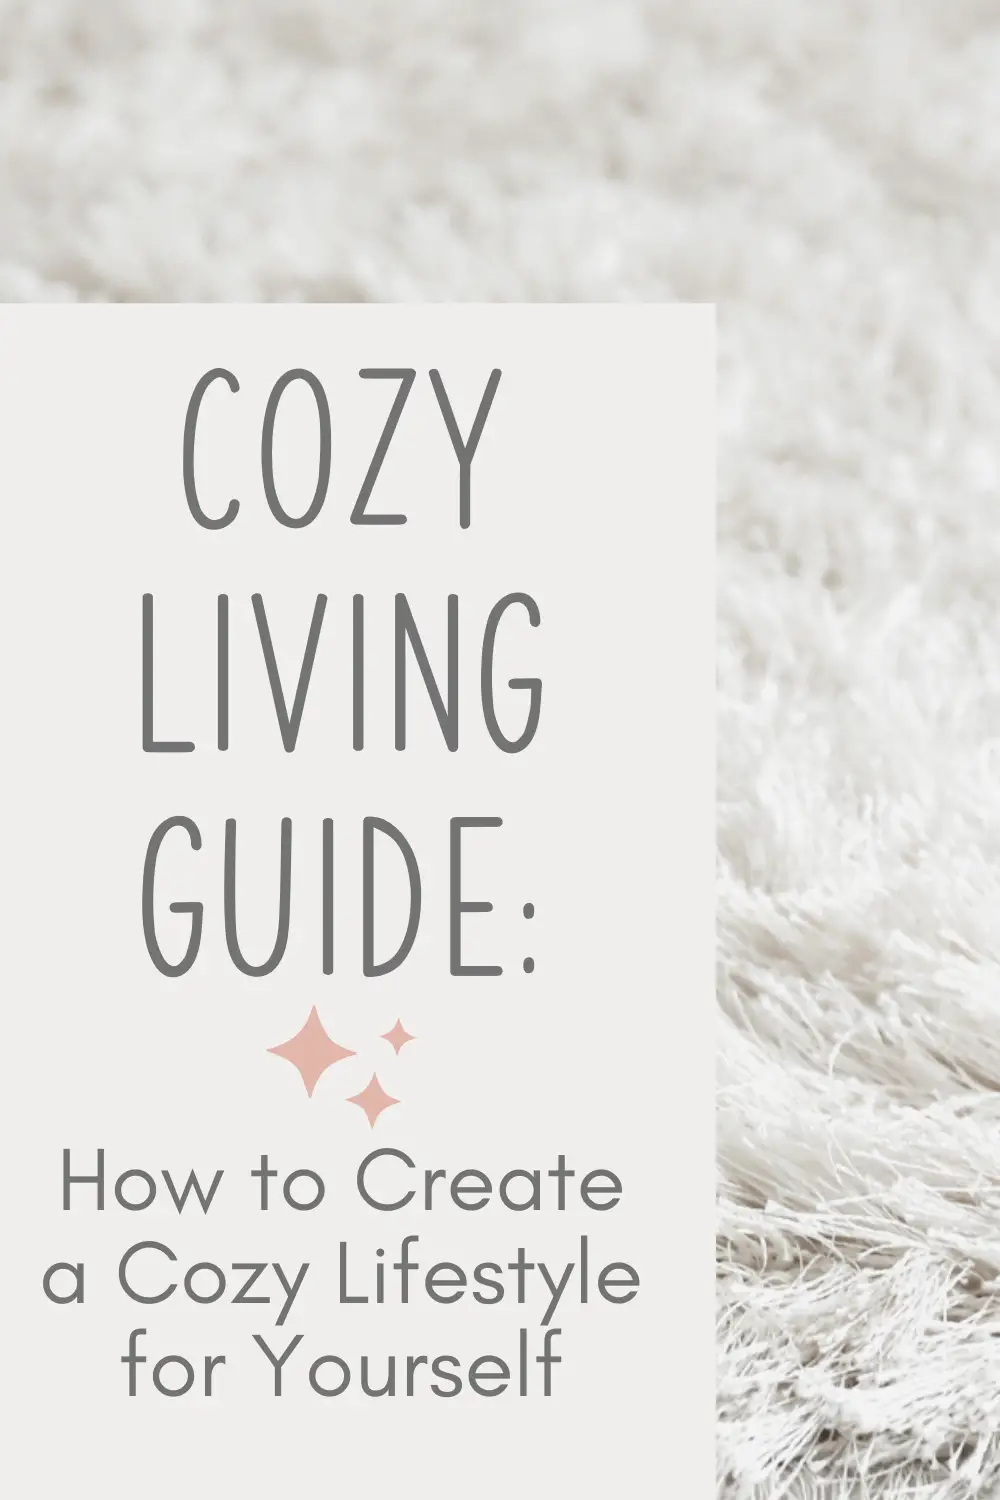 Background image: white furry material - text overlay: Cozy Living Guide, How to create a cozy lifestyle for yourself